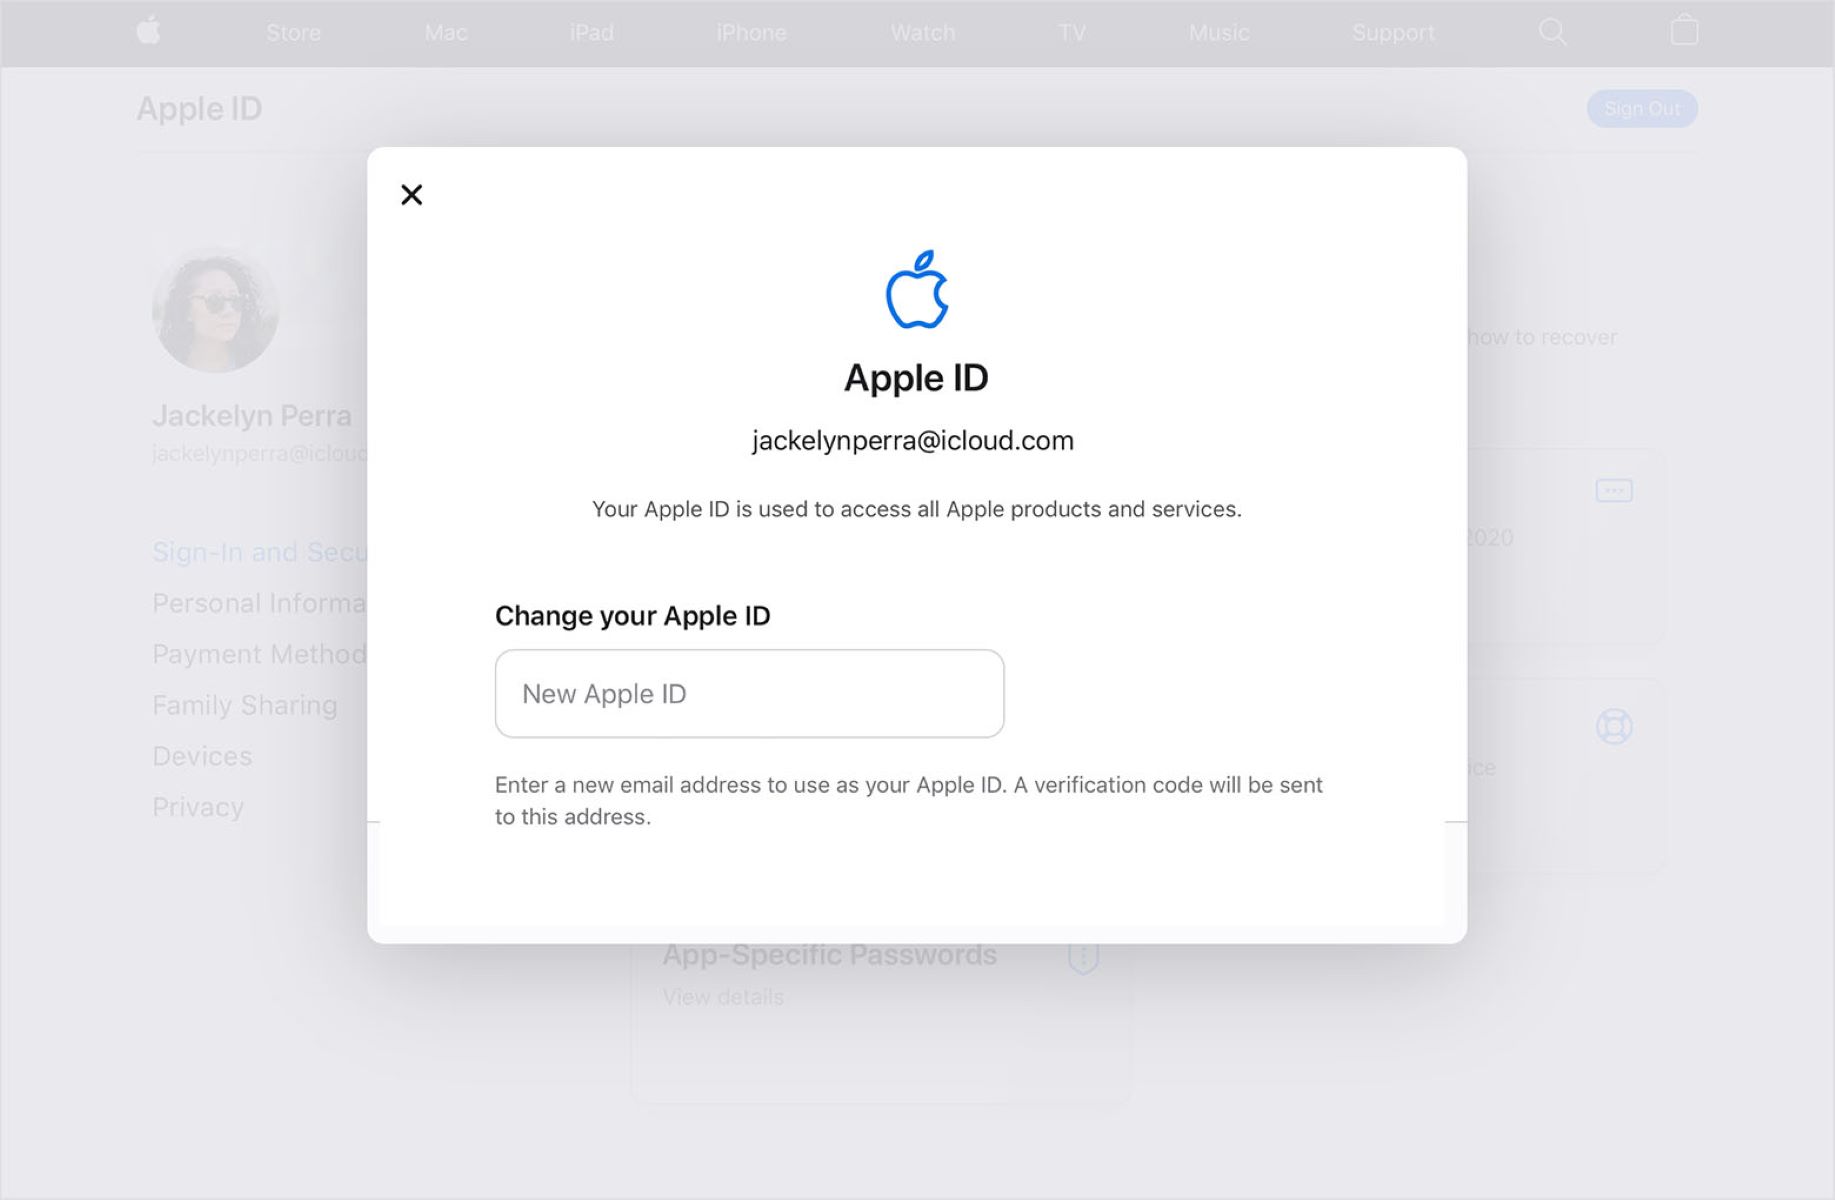 How To Change Apple ID Email